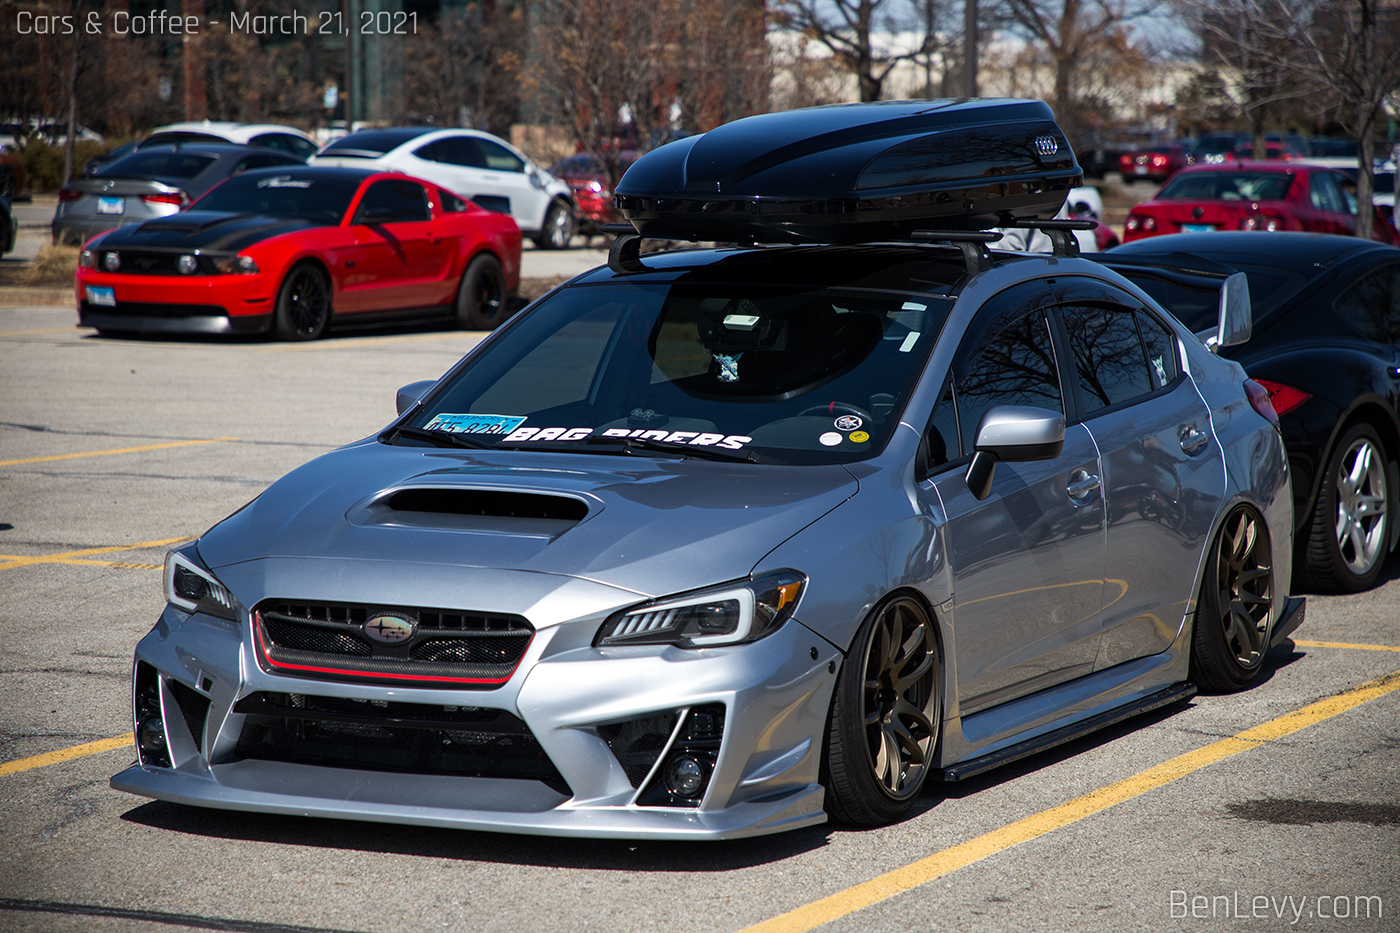 Silver Subaru WRX with Audi Rooftop Cargo Carrier